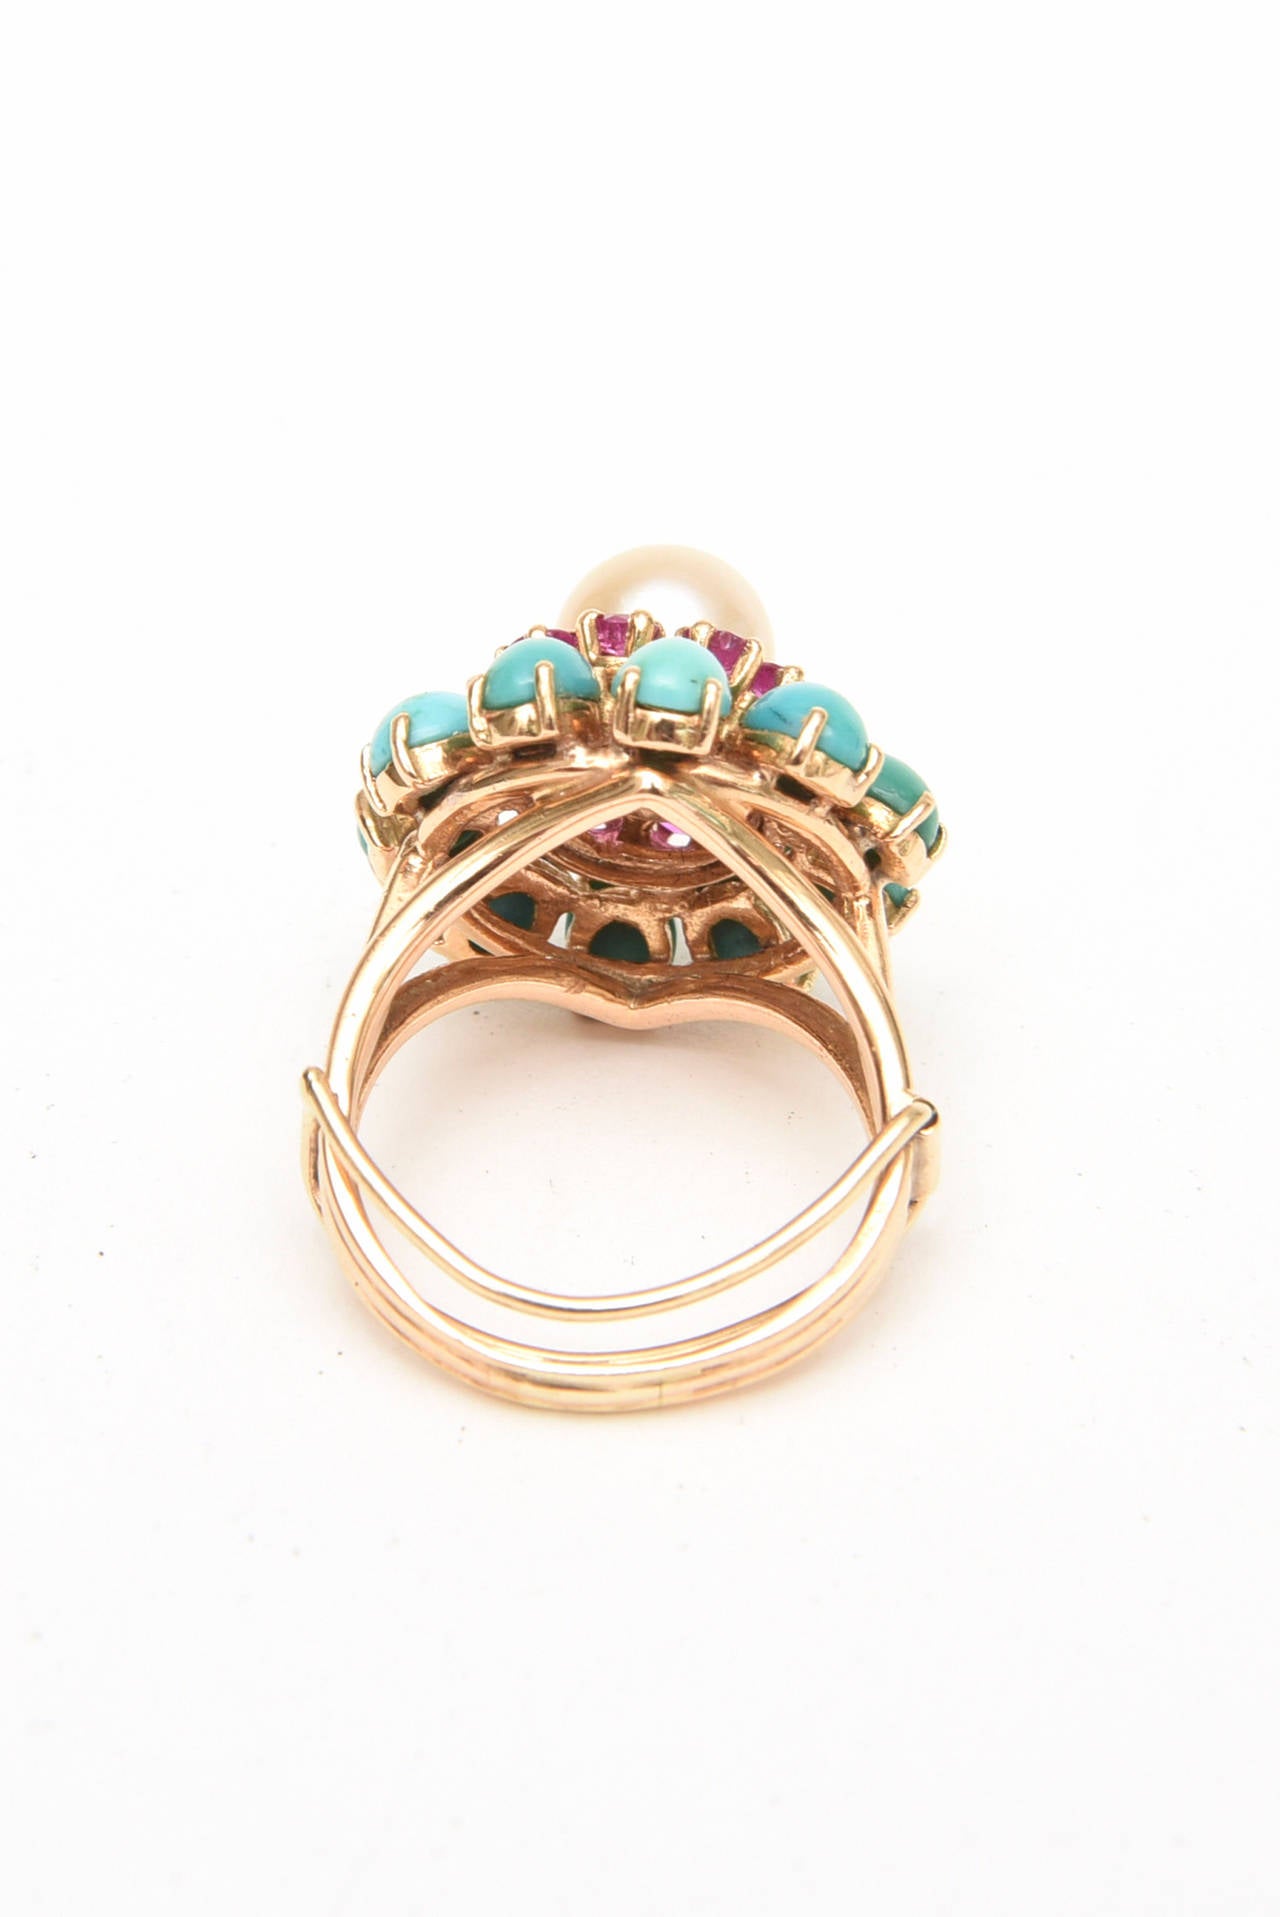 ruby pearl ring